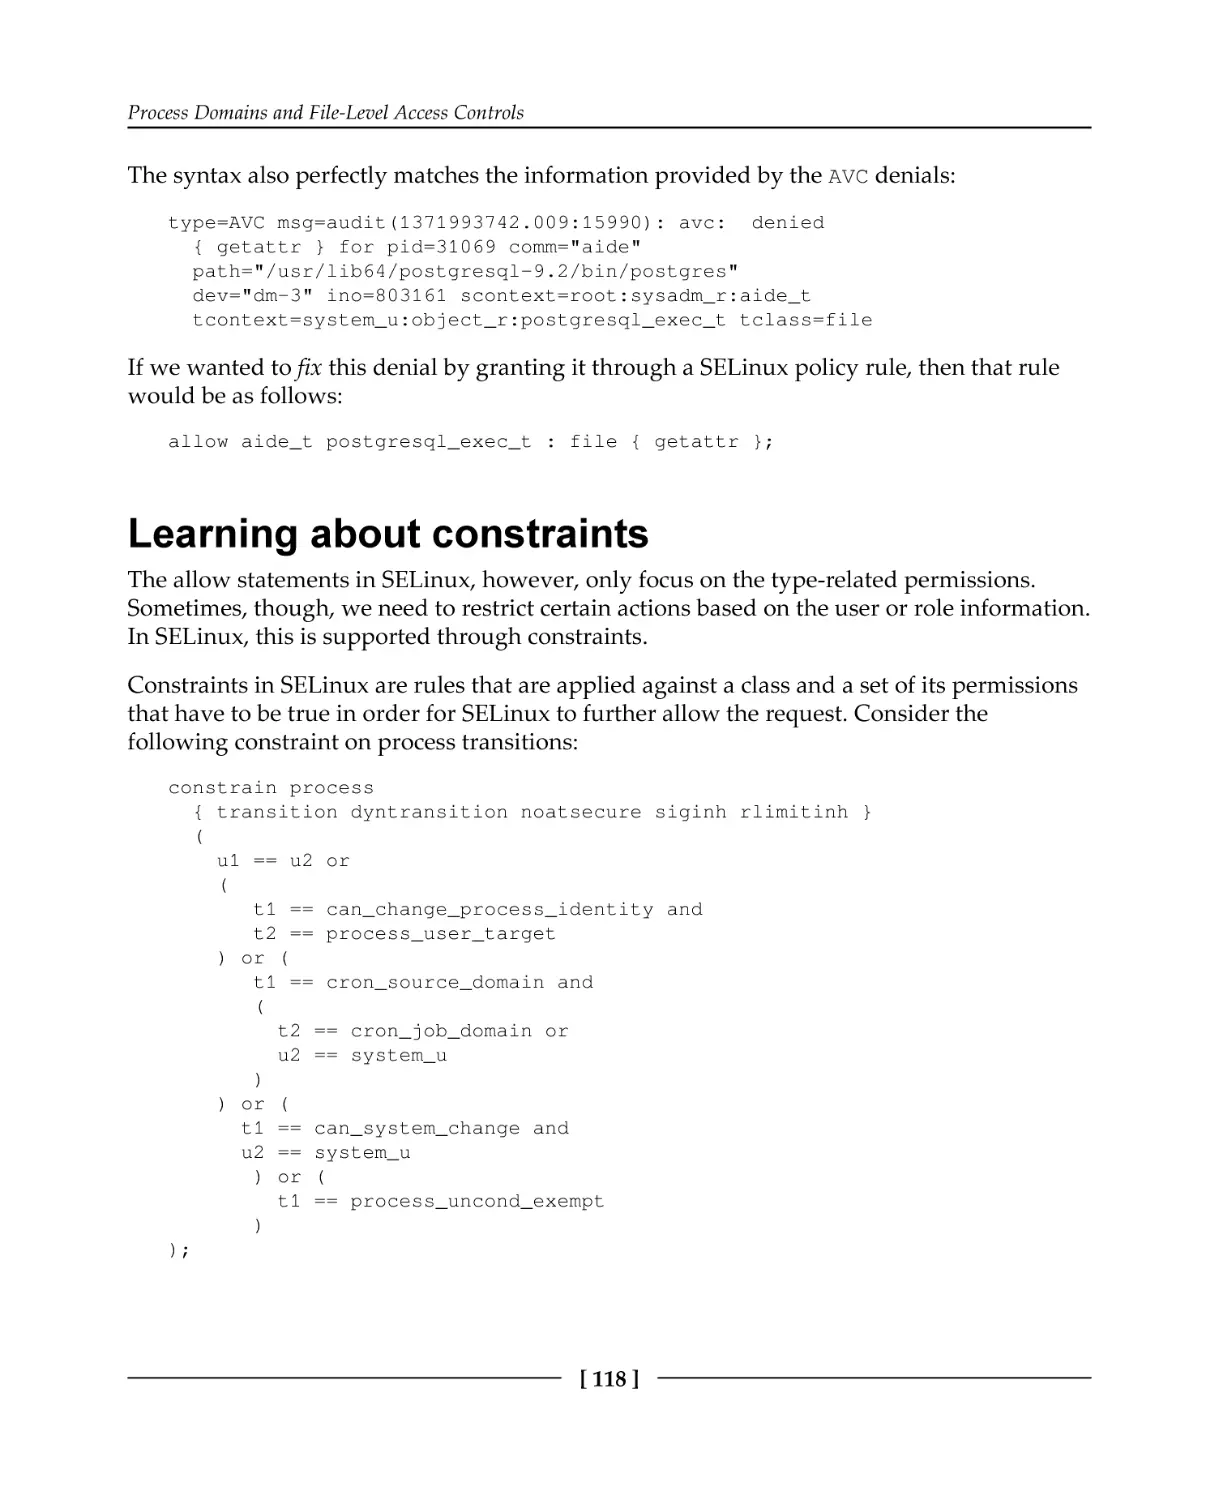 Learning about constraints